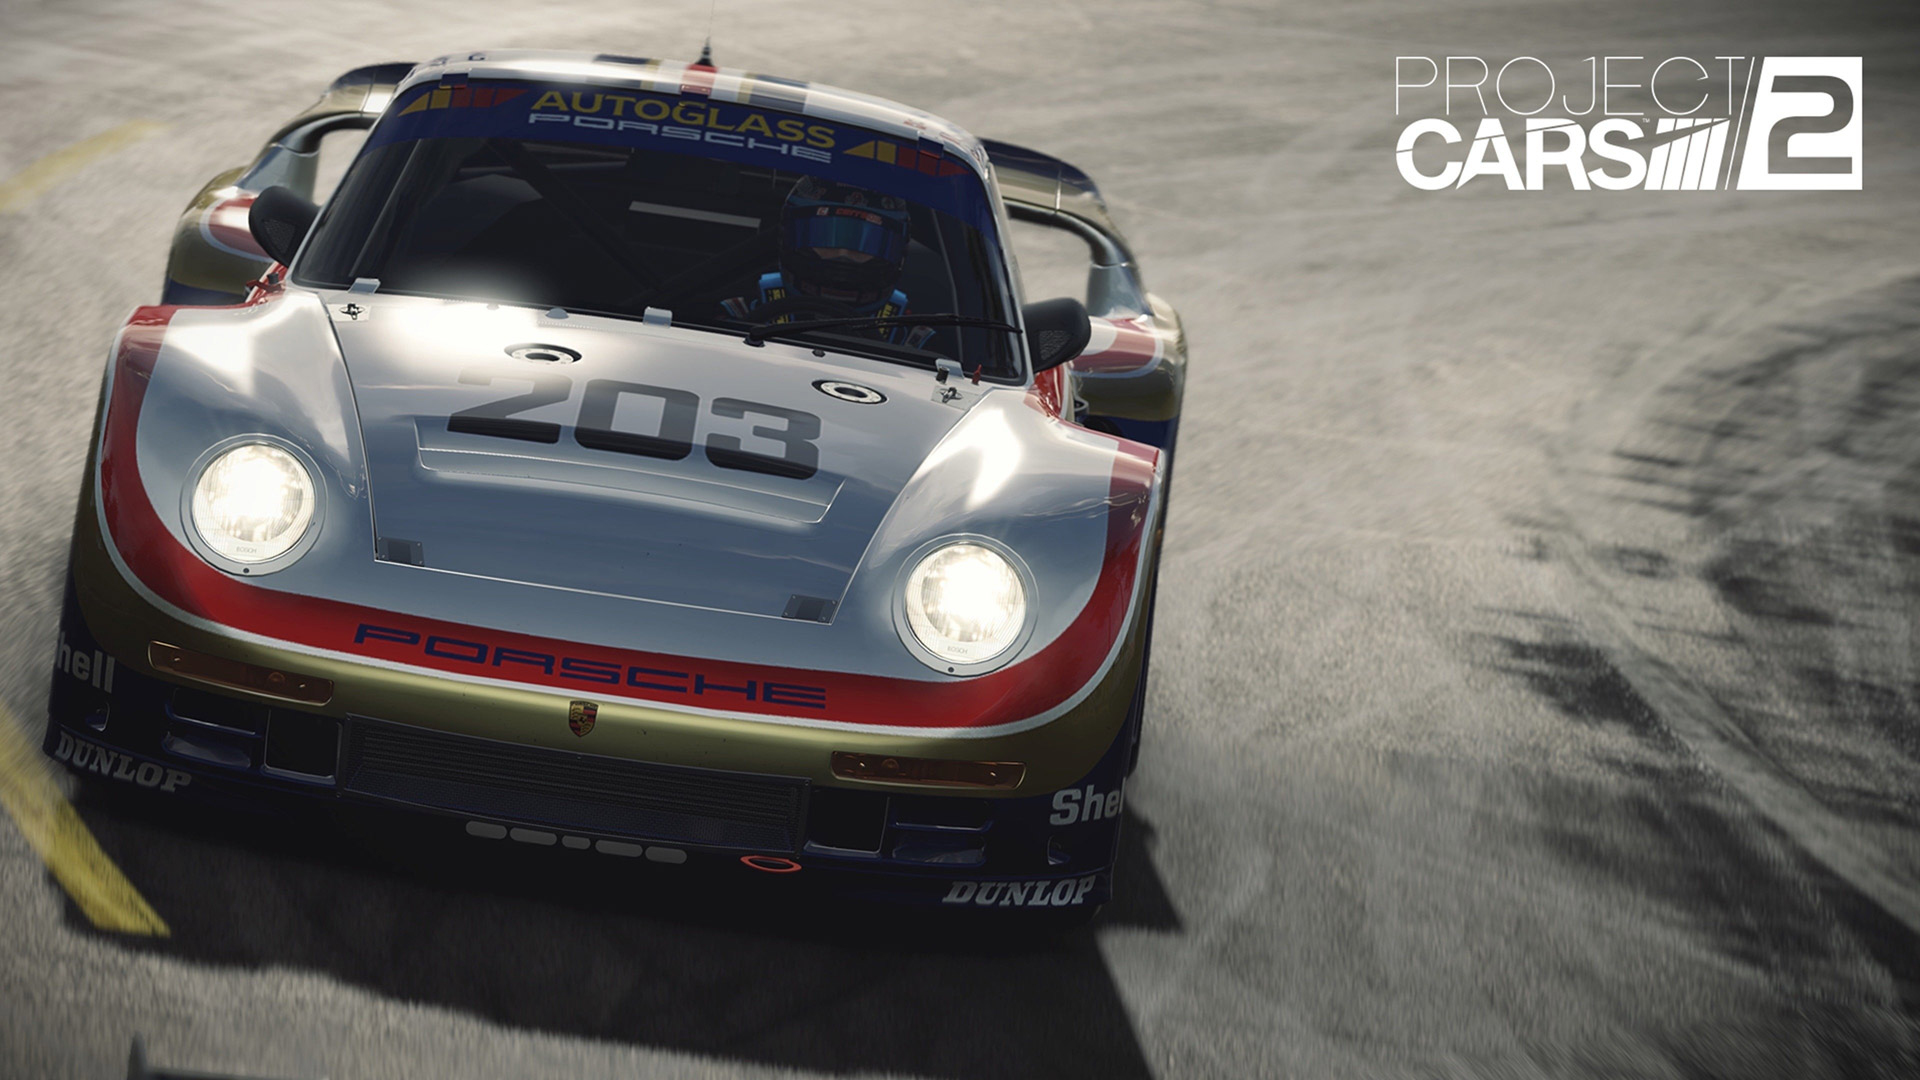 Detail Project Cars 2 Wallpaper Nomer 24